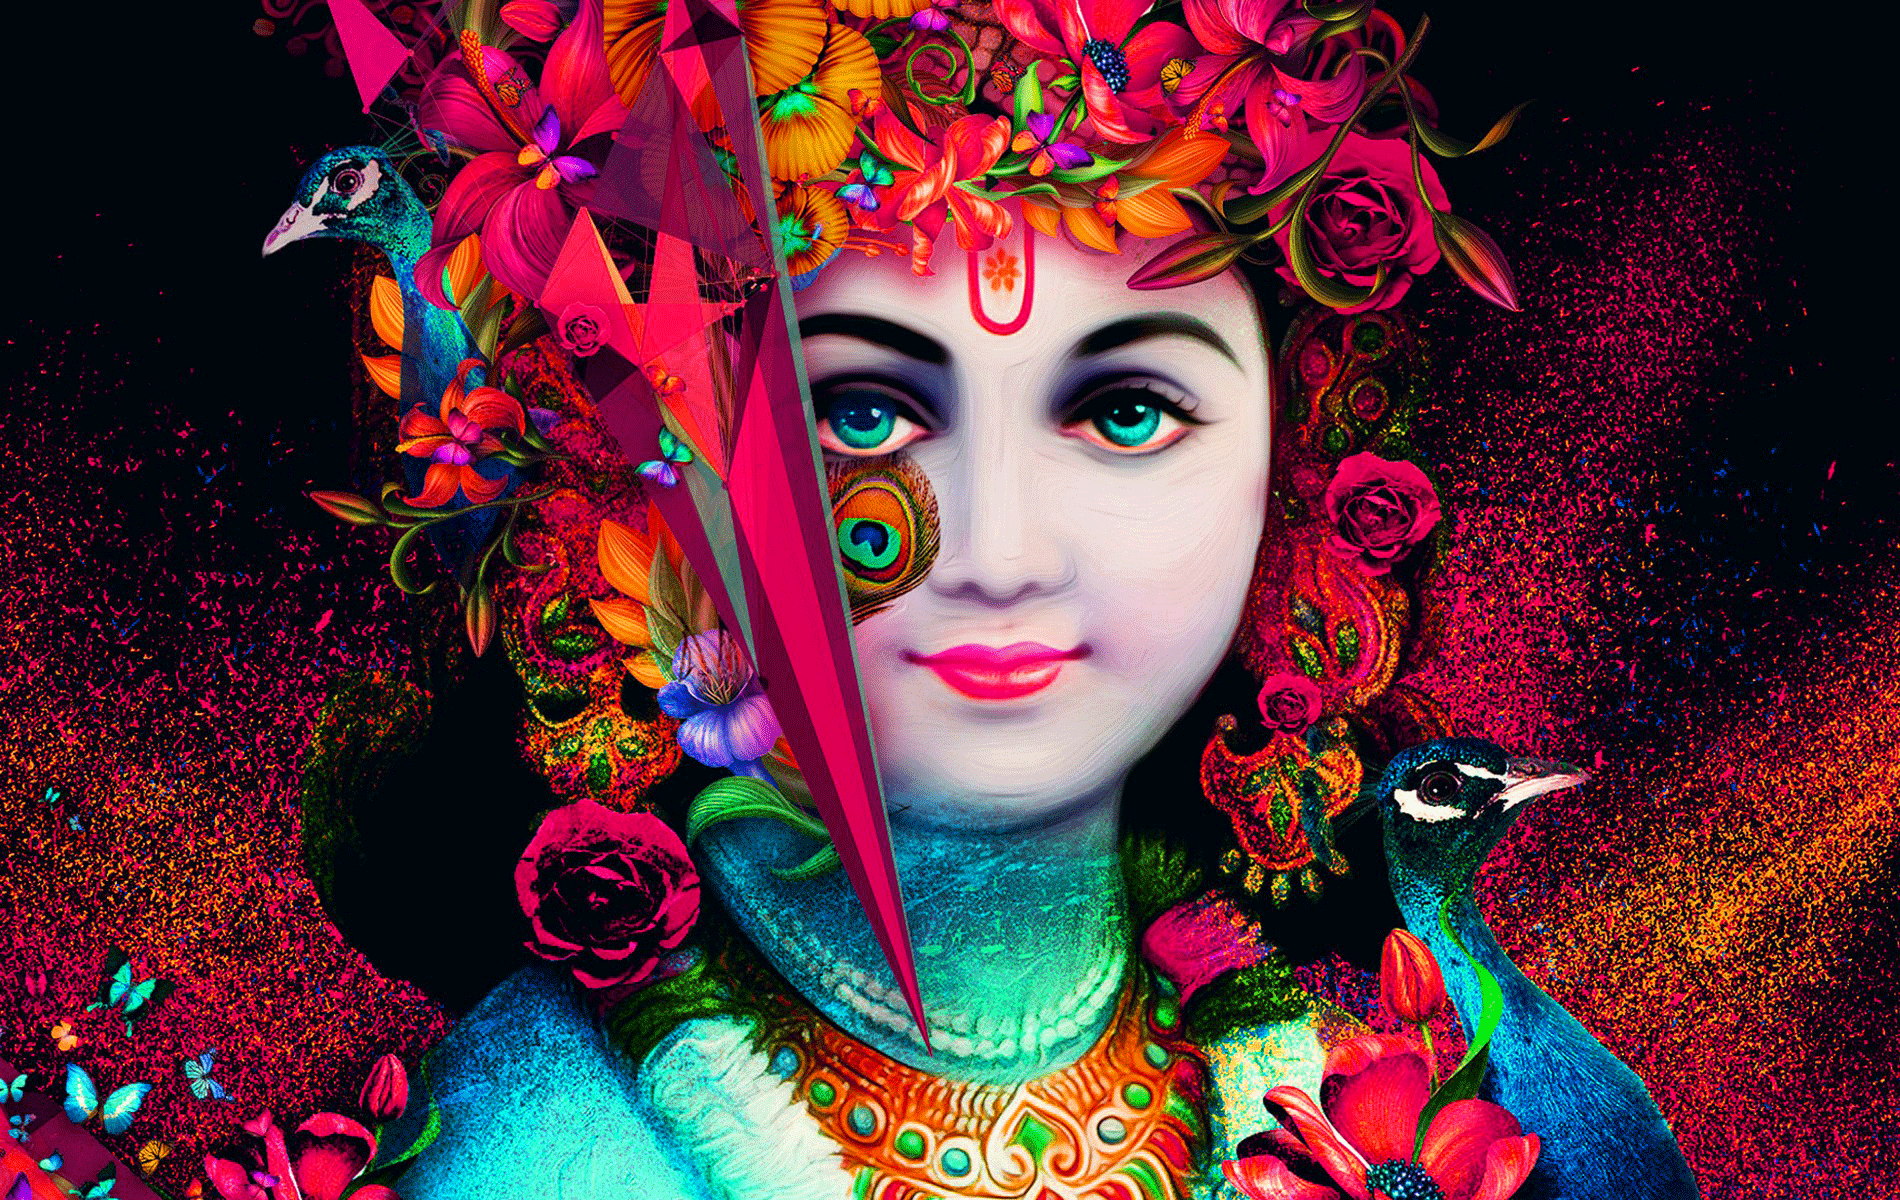 Ultra Hd Lord Krishna Hd Wallpapers 1920X1080 For Mobile : Aspect ratio